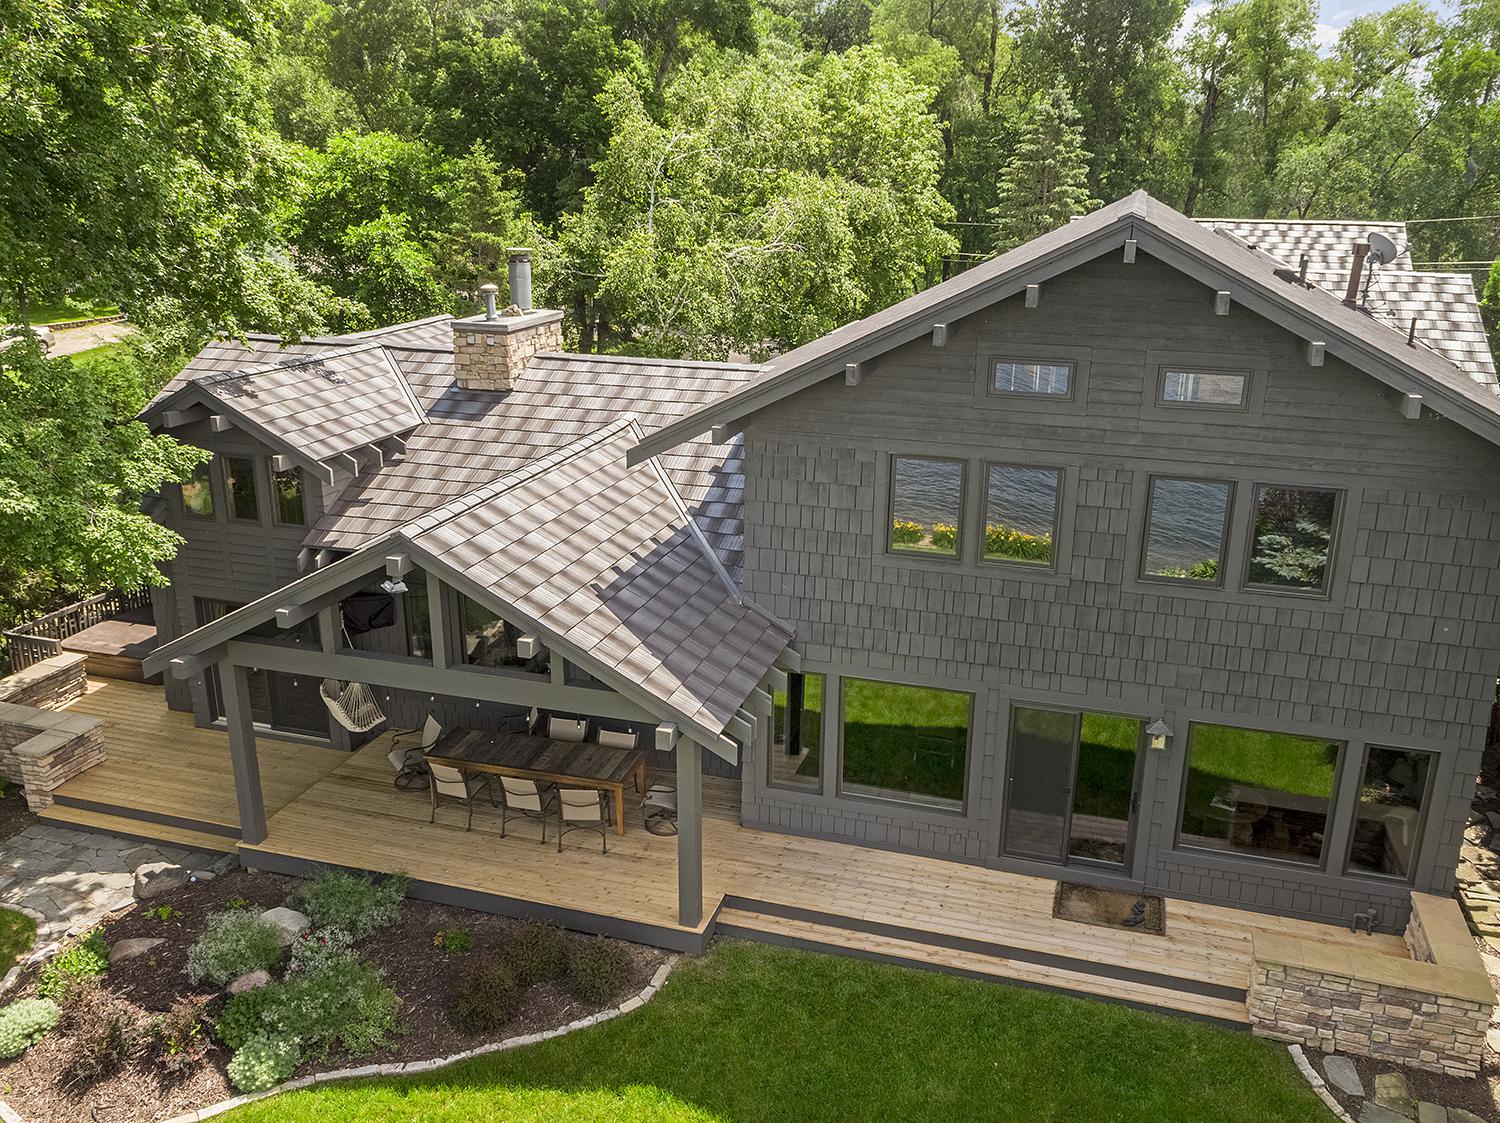 A unique rustic appearance of Infiniti Roadhouse roofing gives this home additional personality.